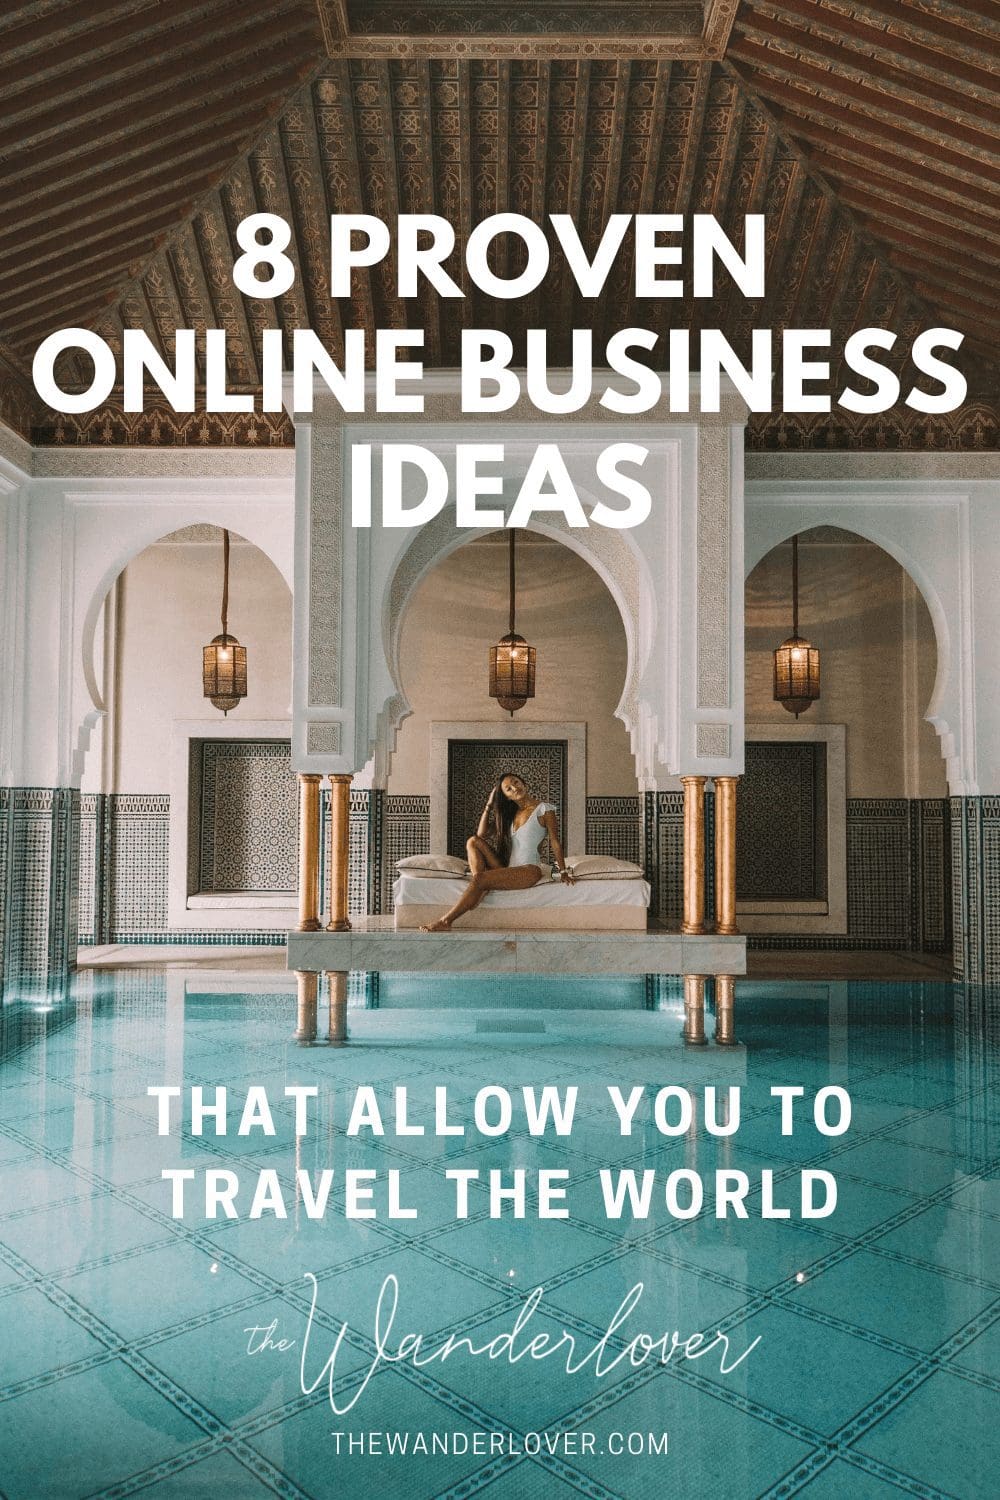 8 Proven Online Business Ideas that Allow You to Travel The World